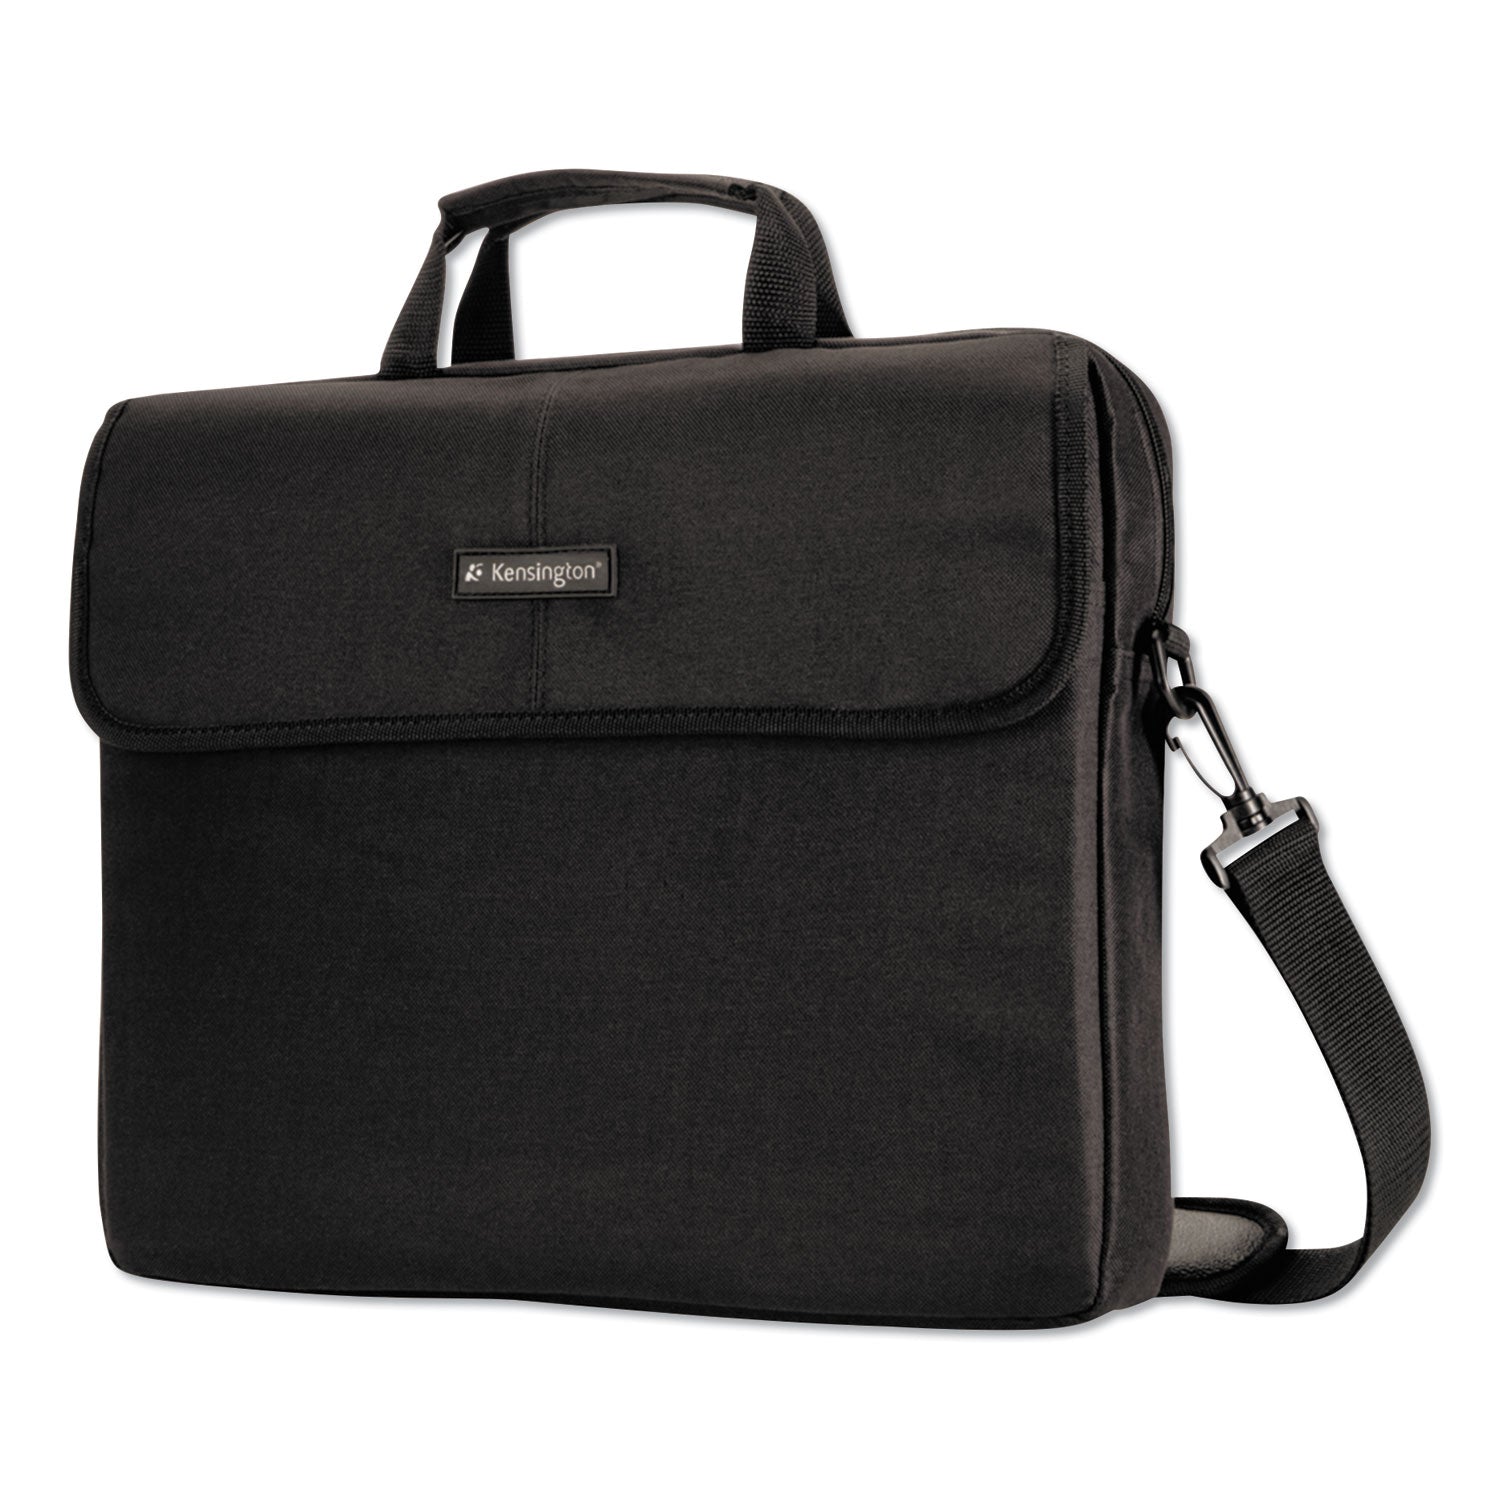 Simply Portable Padded Laptop Sleeve, Fits Devices Up to 17", Polyester, 17.38 x 2.13 x 14.25, Black - 